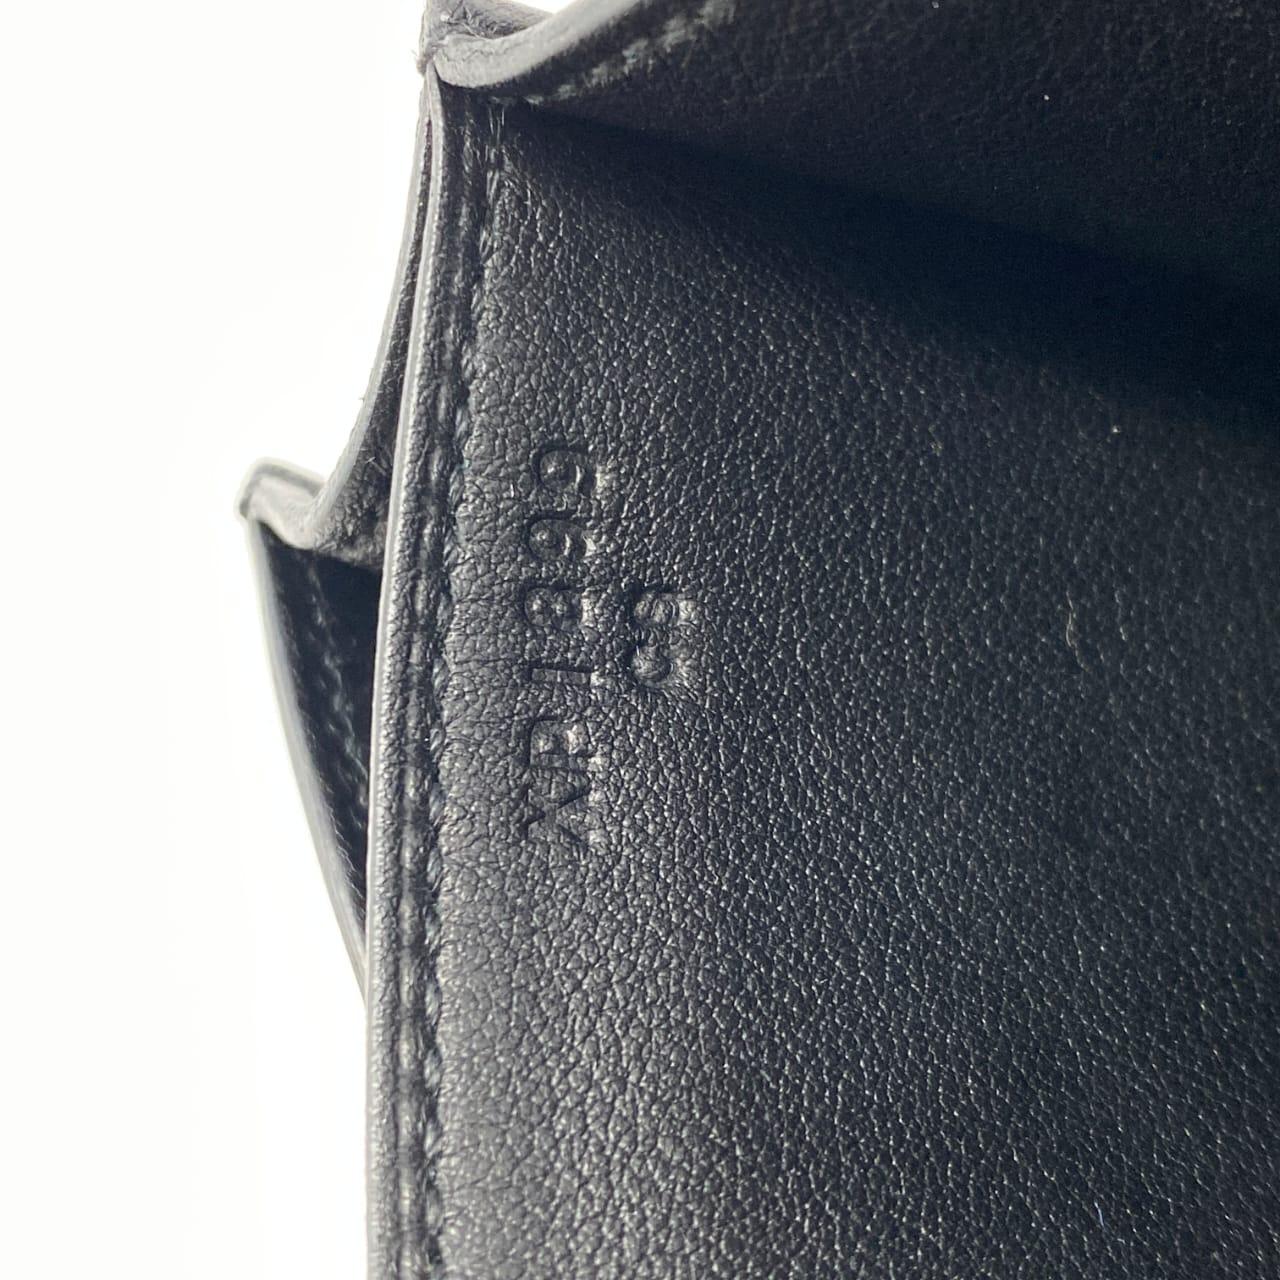 A classic hermes constance 24 black box leather with gold hardware. Stamp X (2016). Overall in great condition, with minor creasing on the flap details and slight hairline scratches on the buckle. Comes with its dust bag.